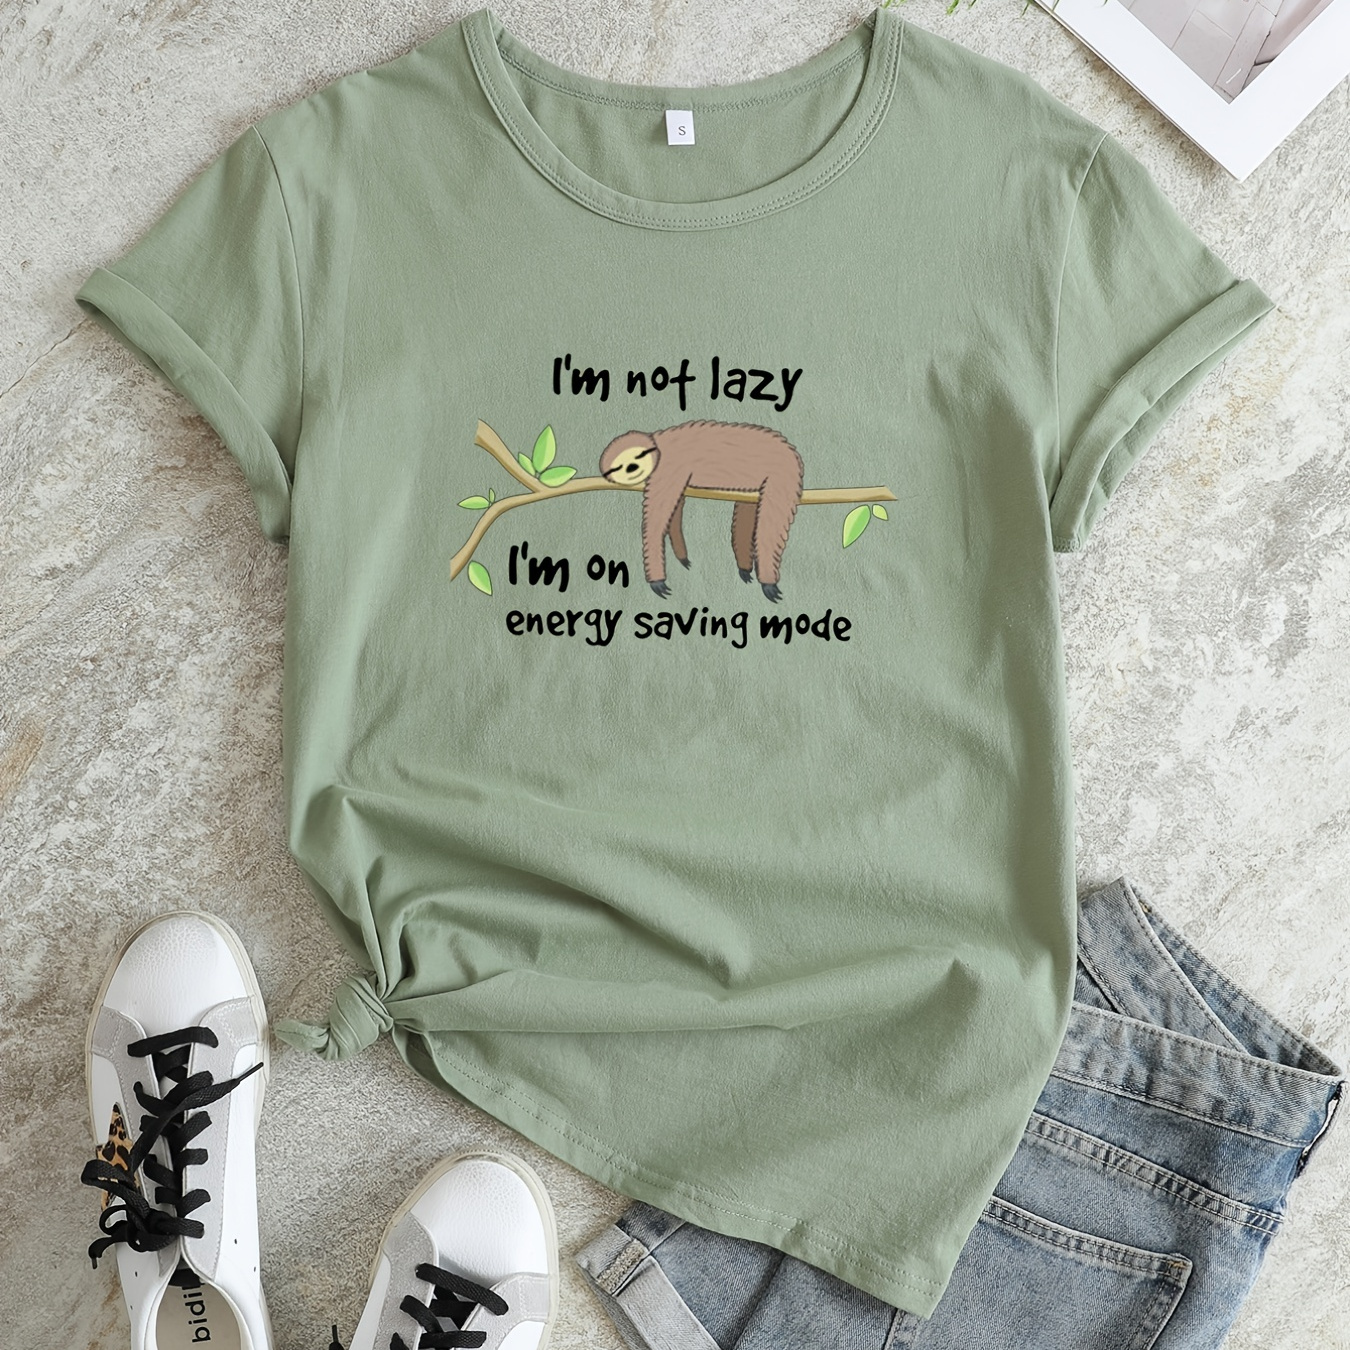 

I'm Not Lazy Print Crew Neck T-shirt, Casual Loose Short Sleeve Fashion Summer T-shirts Tops, Women's Clothing